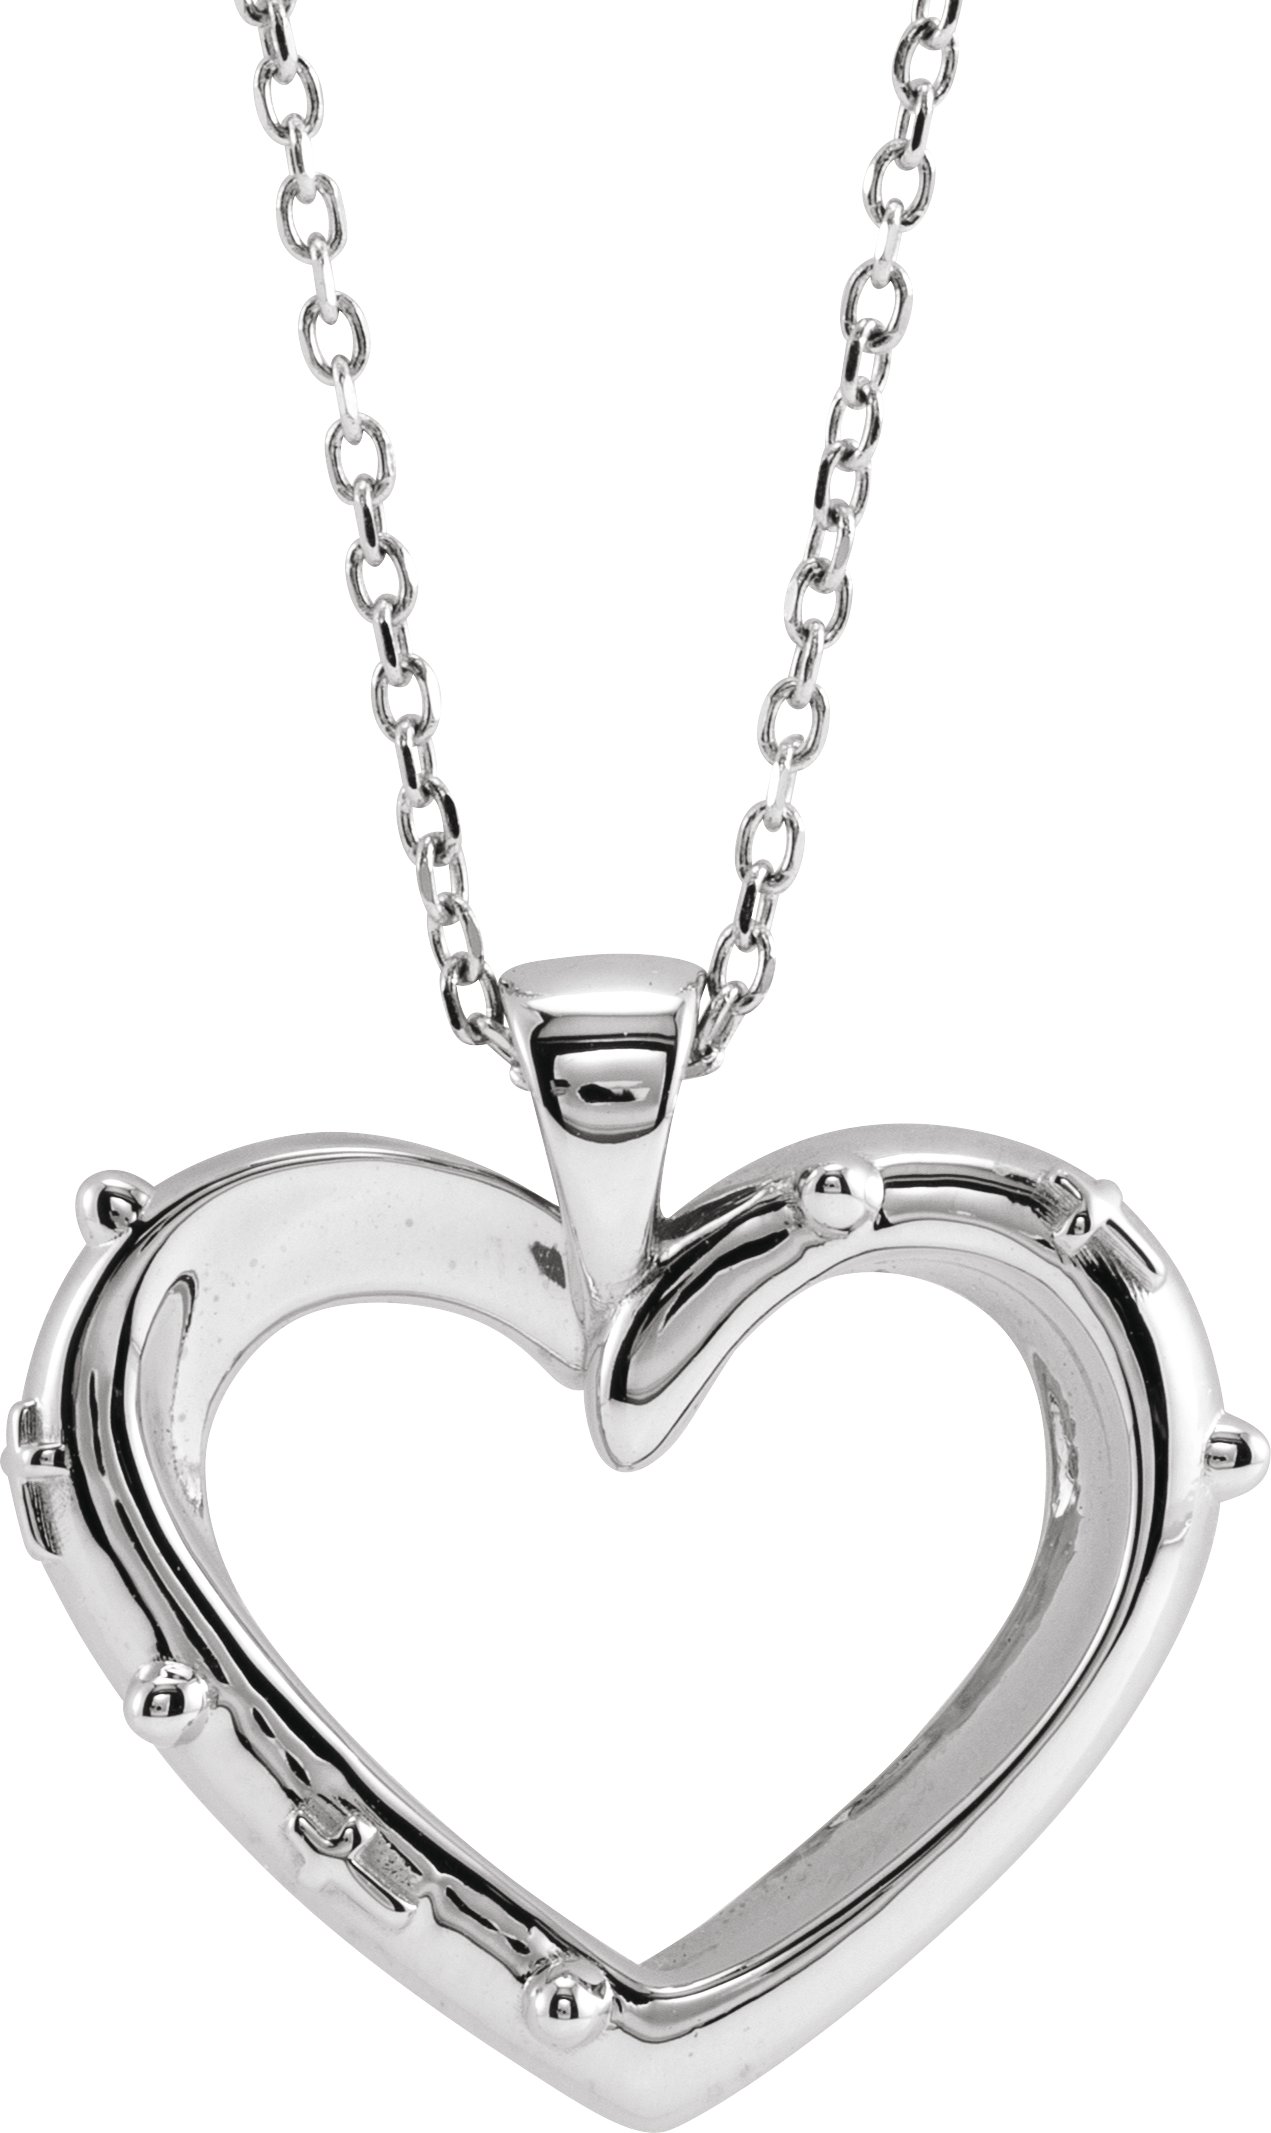 Sterling Silver Rosary Heart 16-18" Necklace